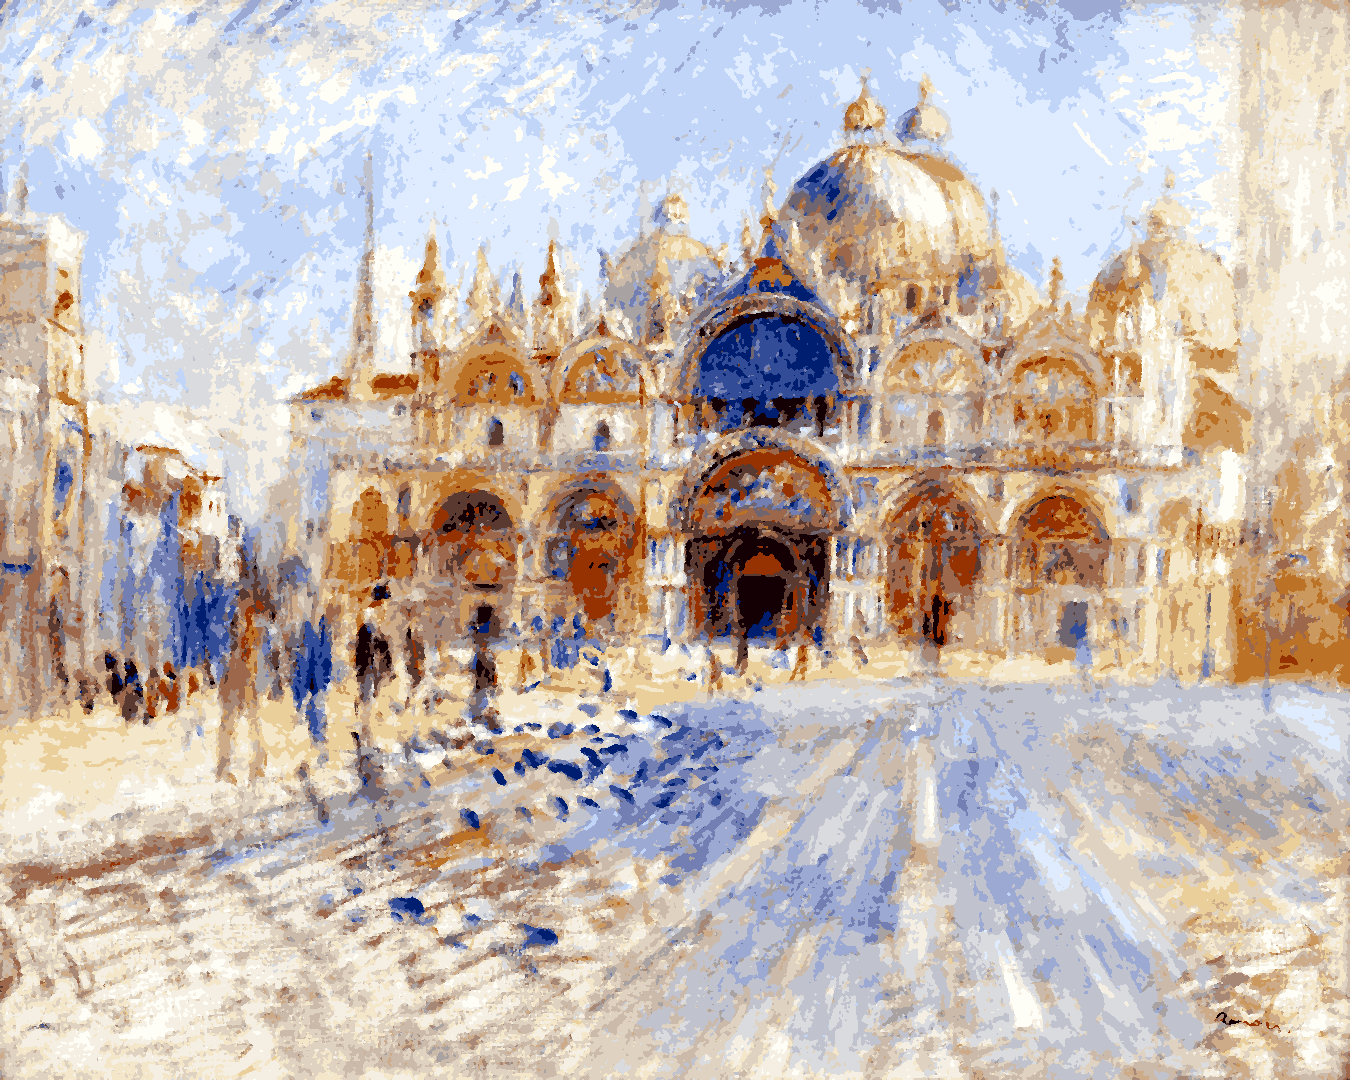 Venice, Italy Collection PD (72) - The Piazza San Marco by Pierre Auguste Renoir - Van-Go Paint-By-Number Kit